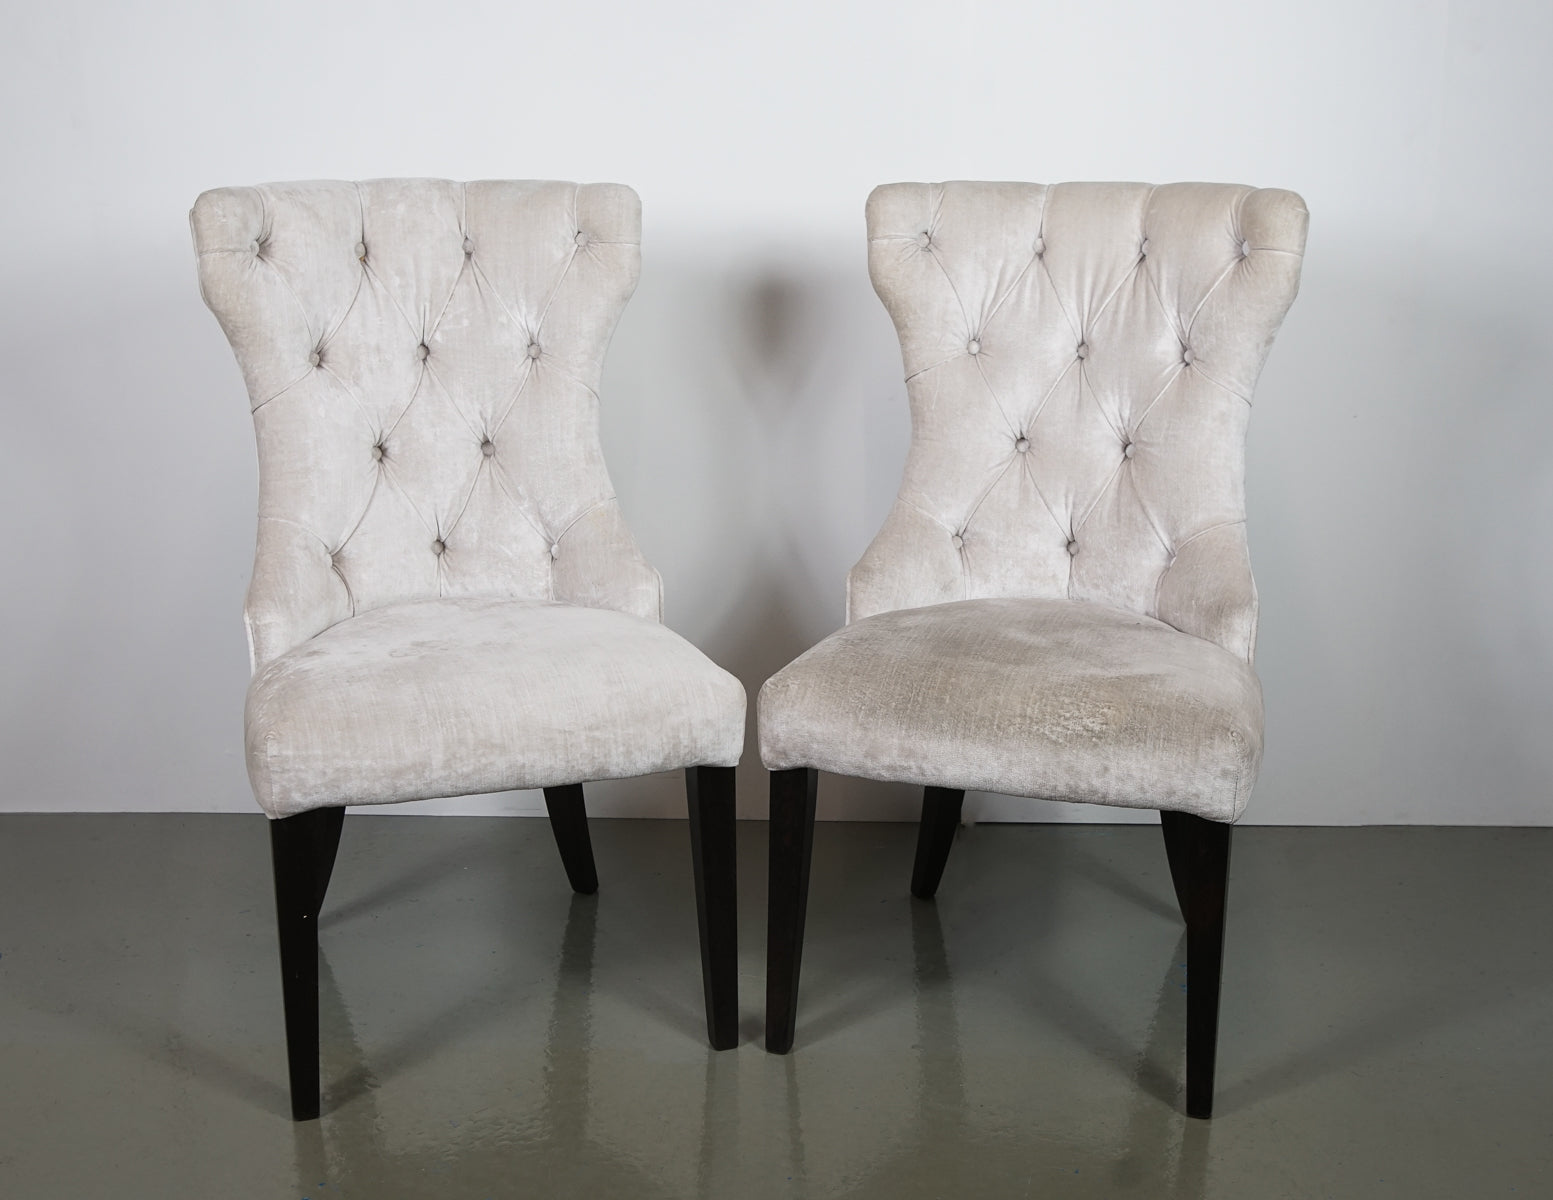 Harrods Occasional Chairs (2 units)